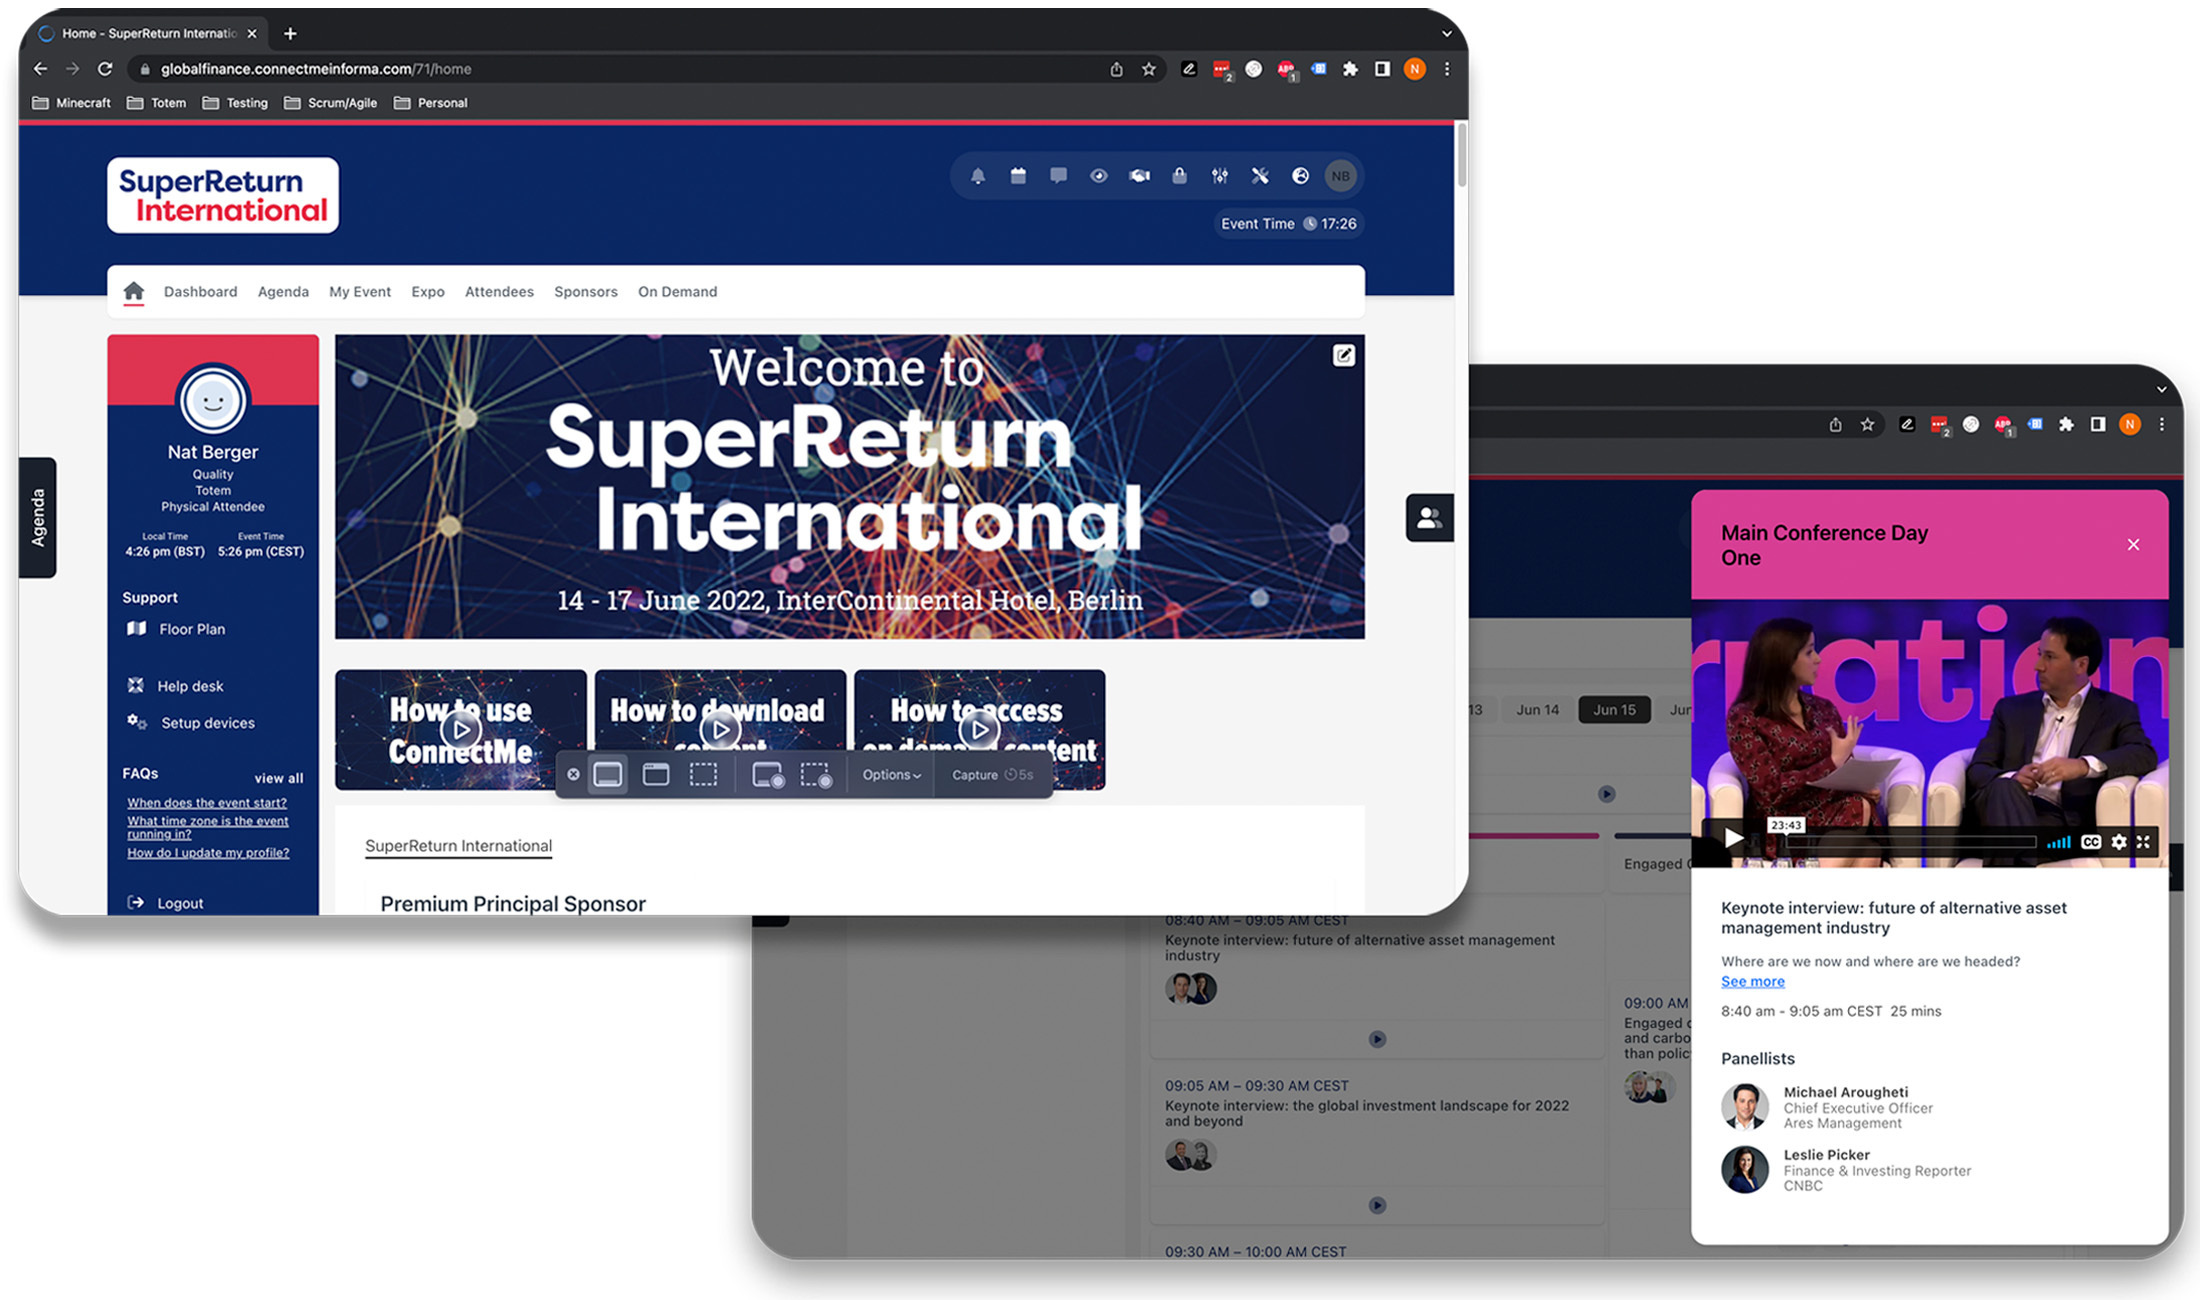 A screenshot showing the agenda and sessions at SuperReturn International